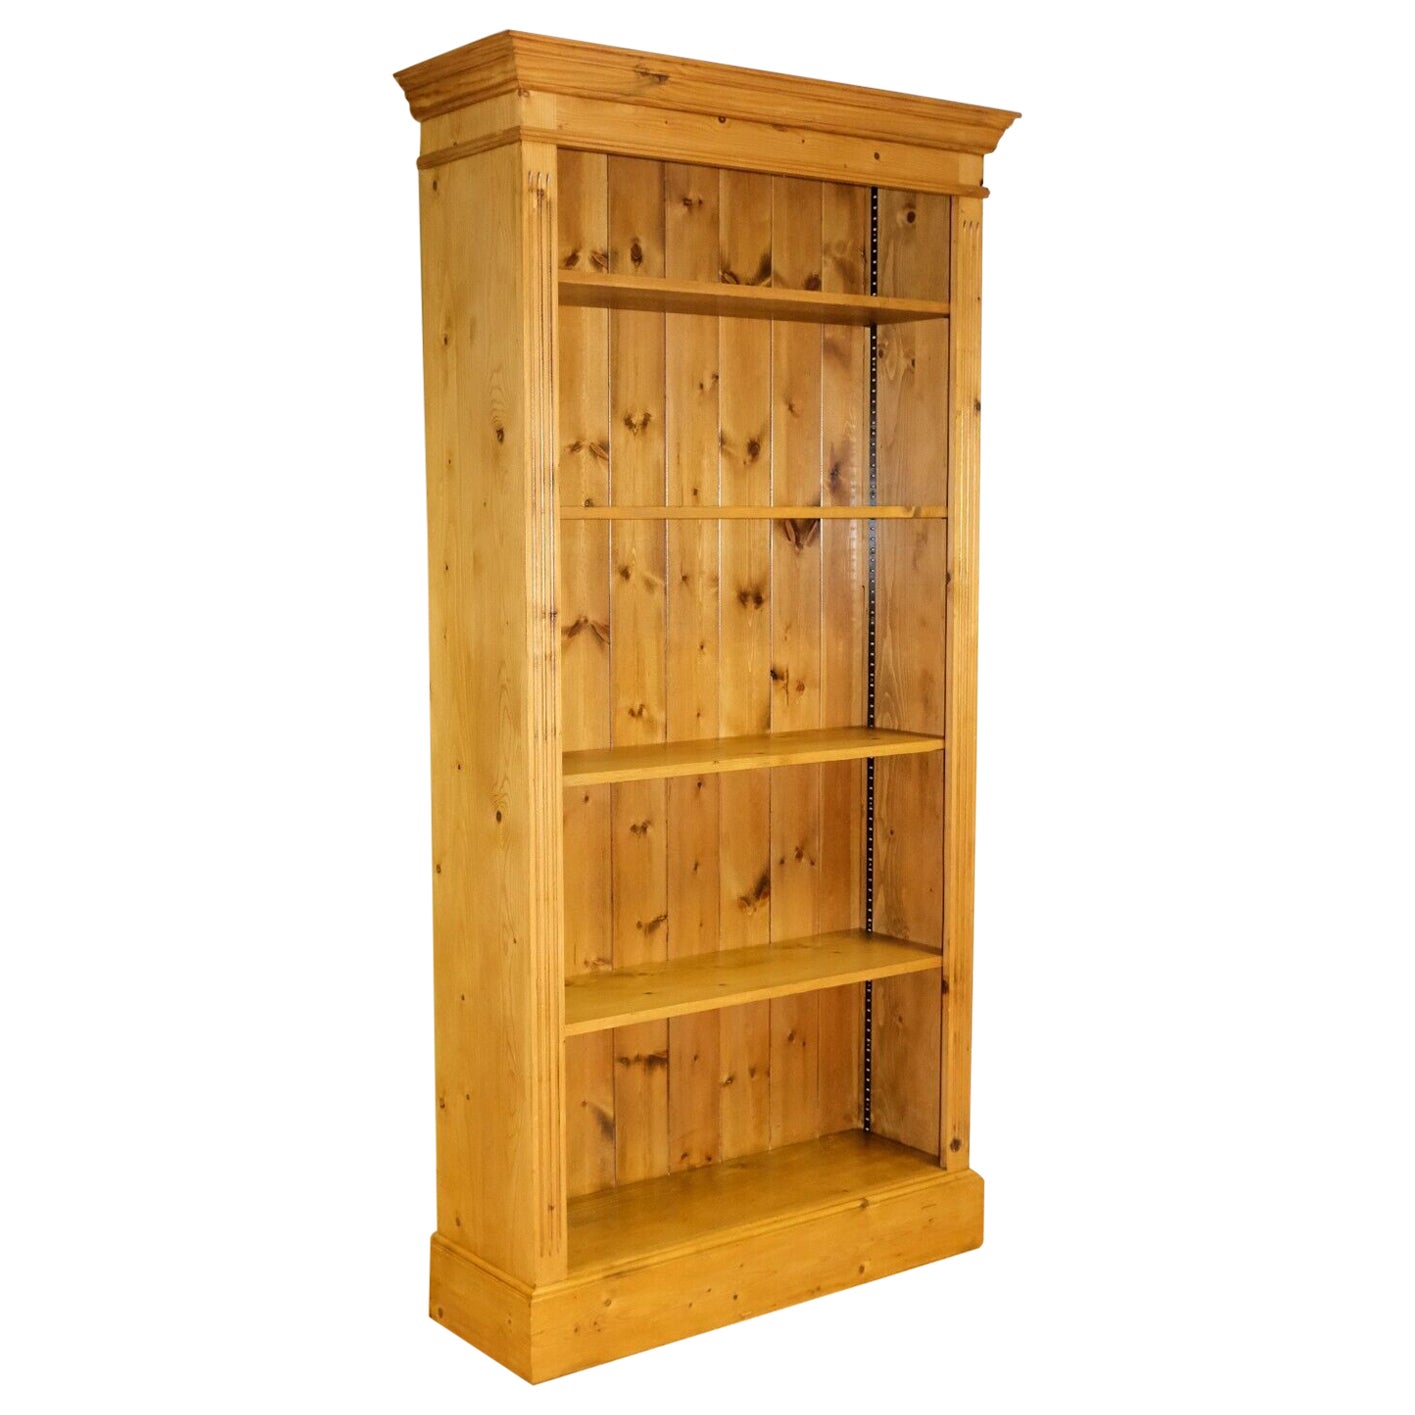 CLASSIC OPEN PINE BOOKCASE WiTH FOUR ADJUSTABLE SHELVES PLINTH BASE